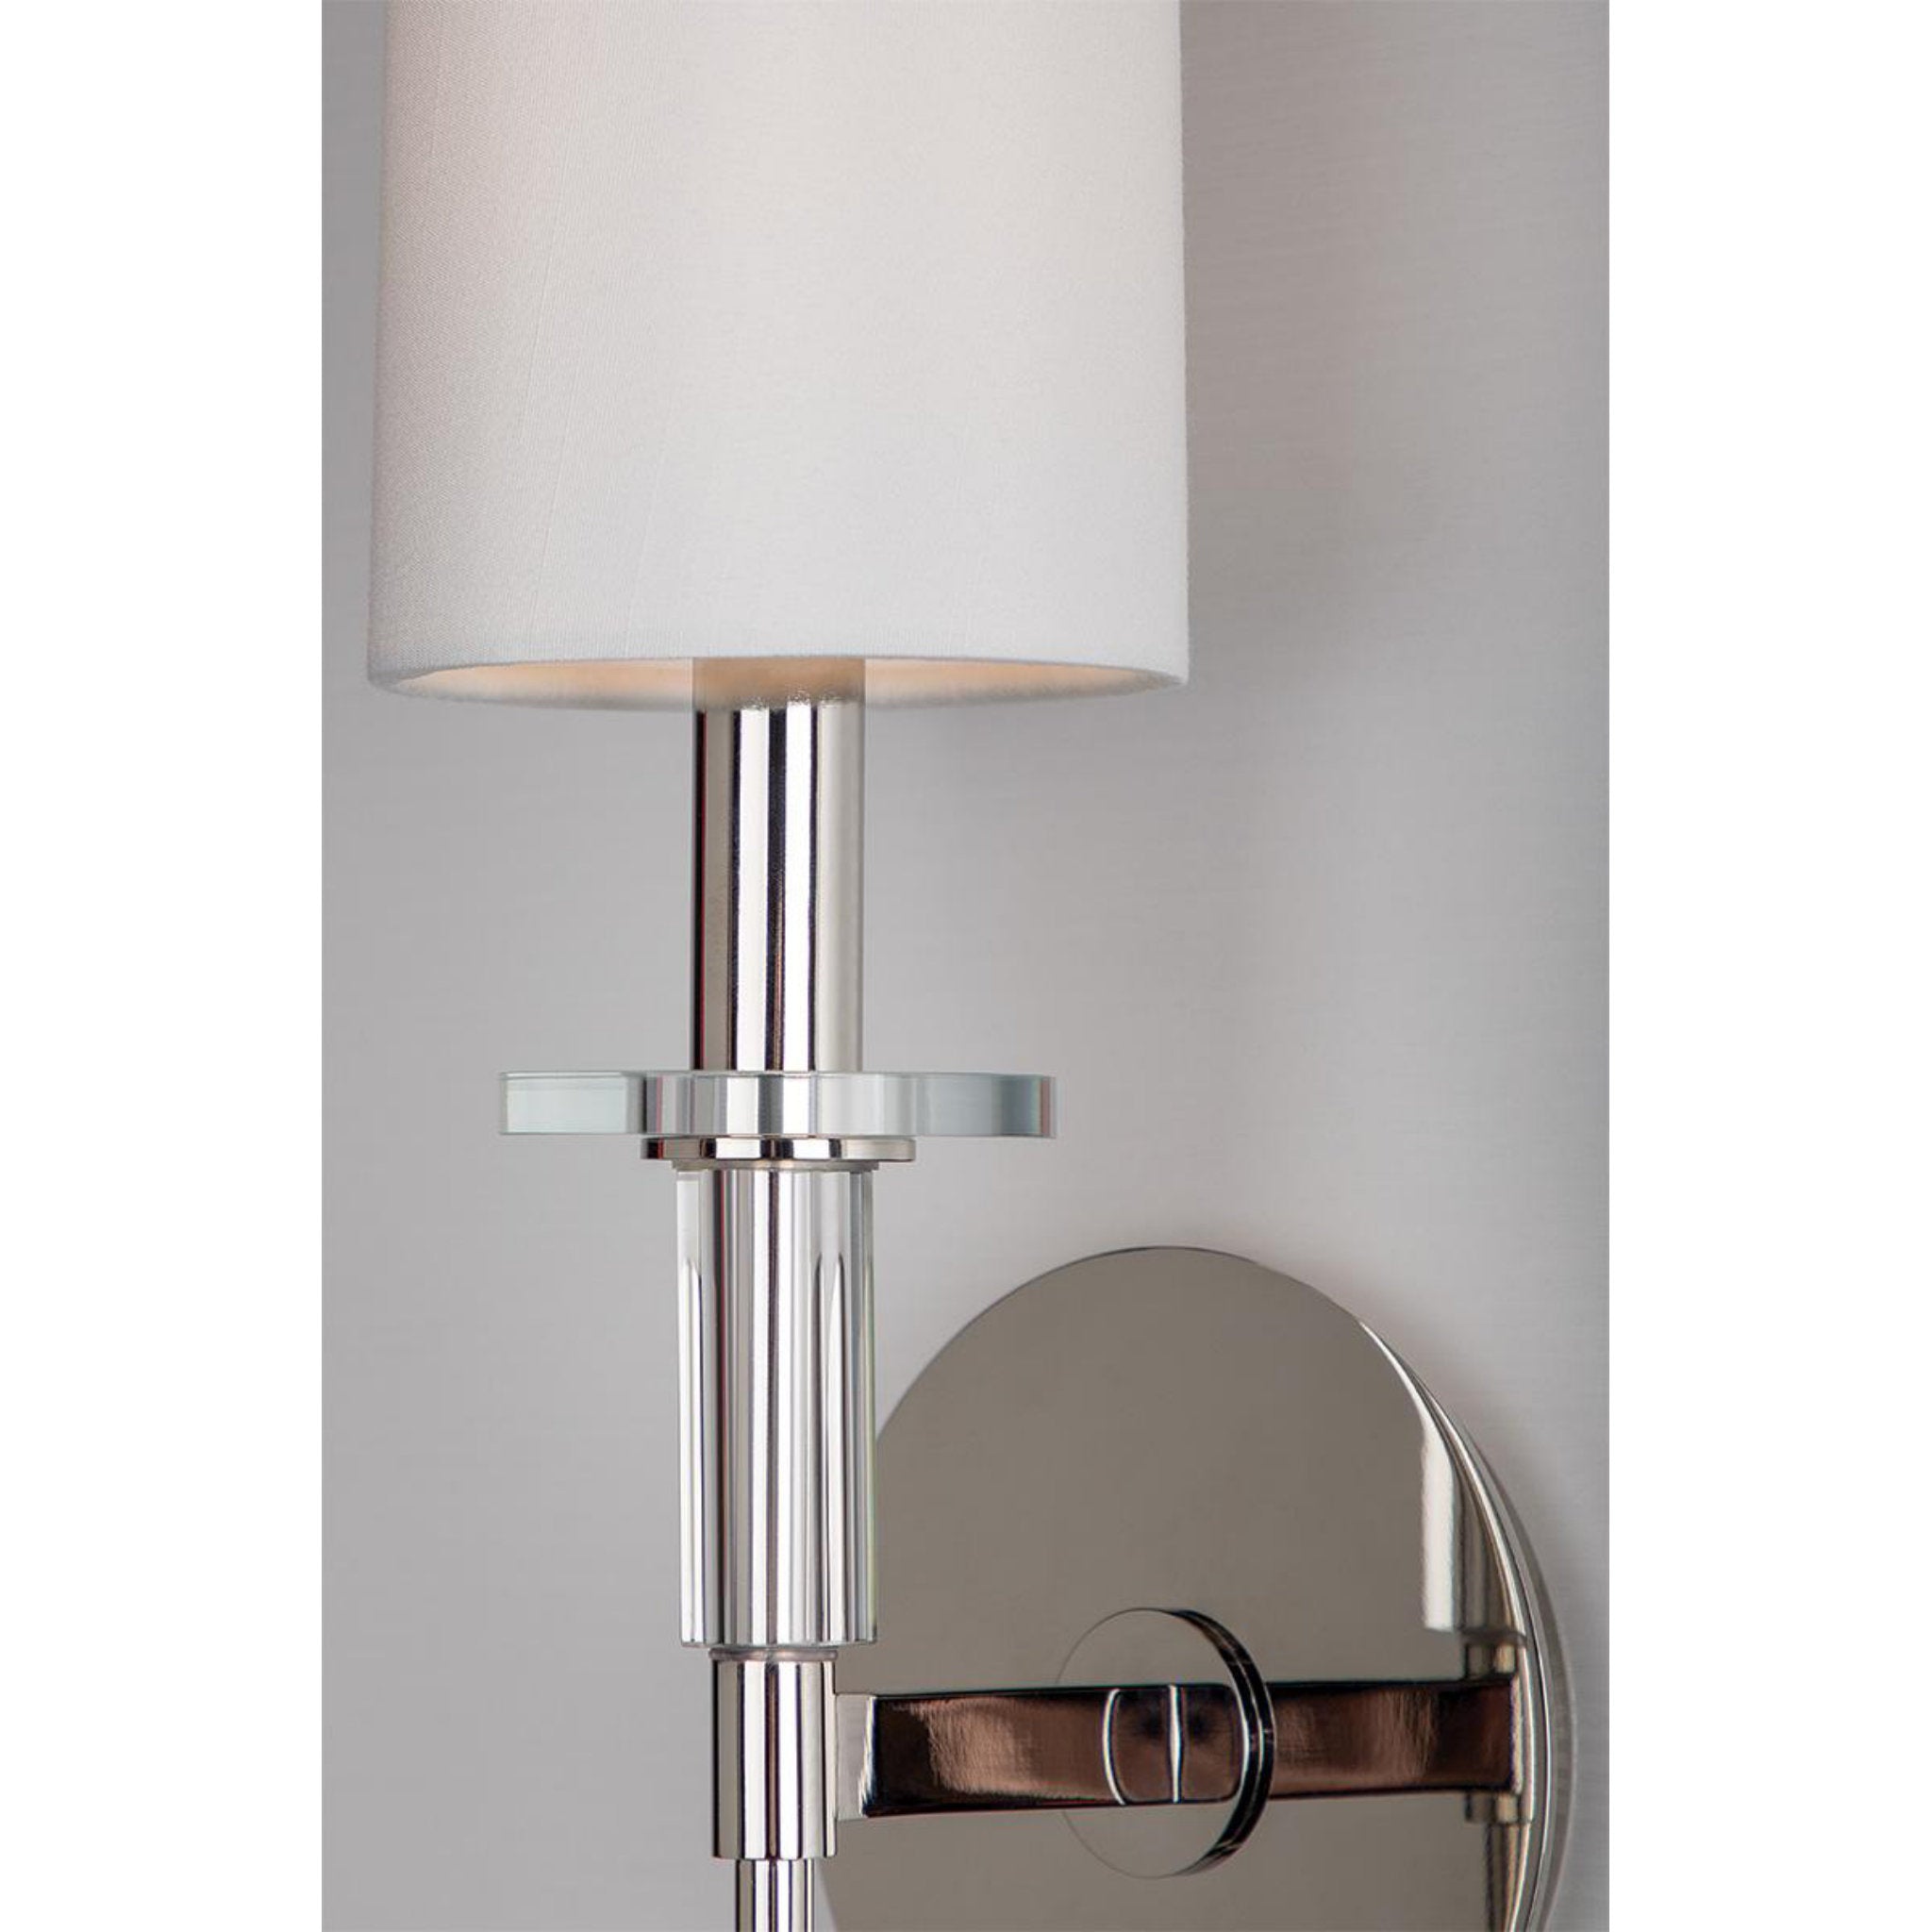 Amherst 2 Light Wall Sconce in Polished Nickel